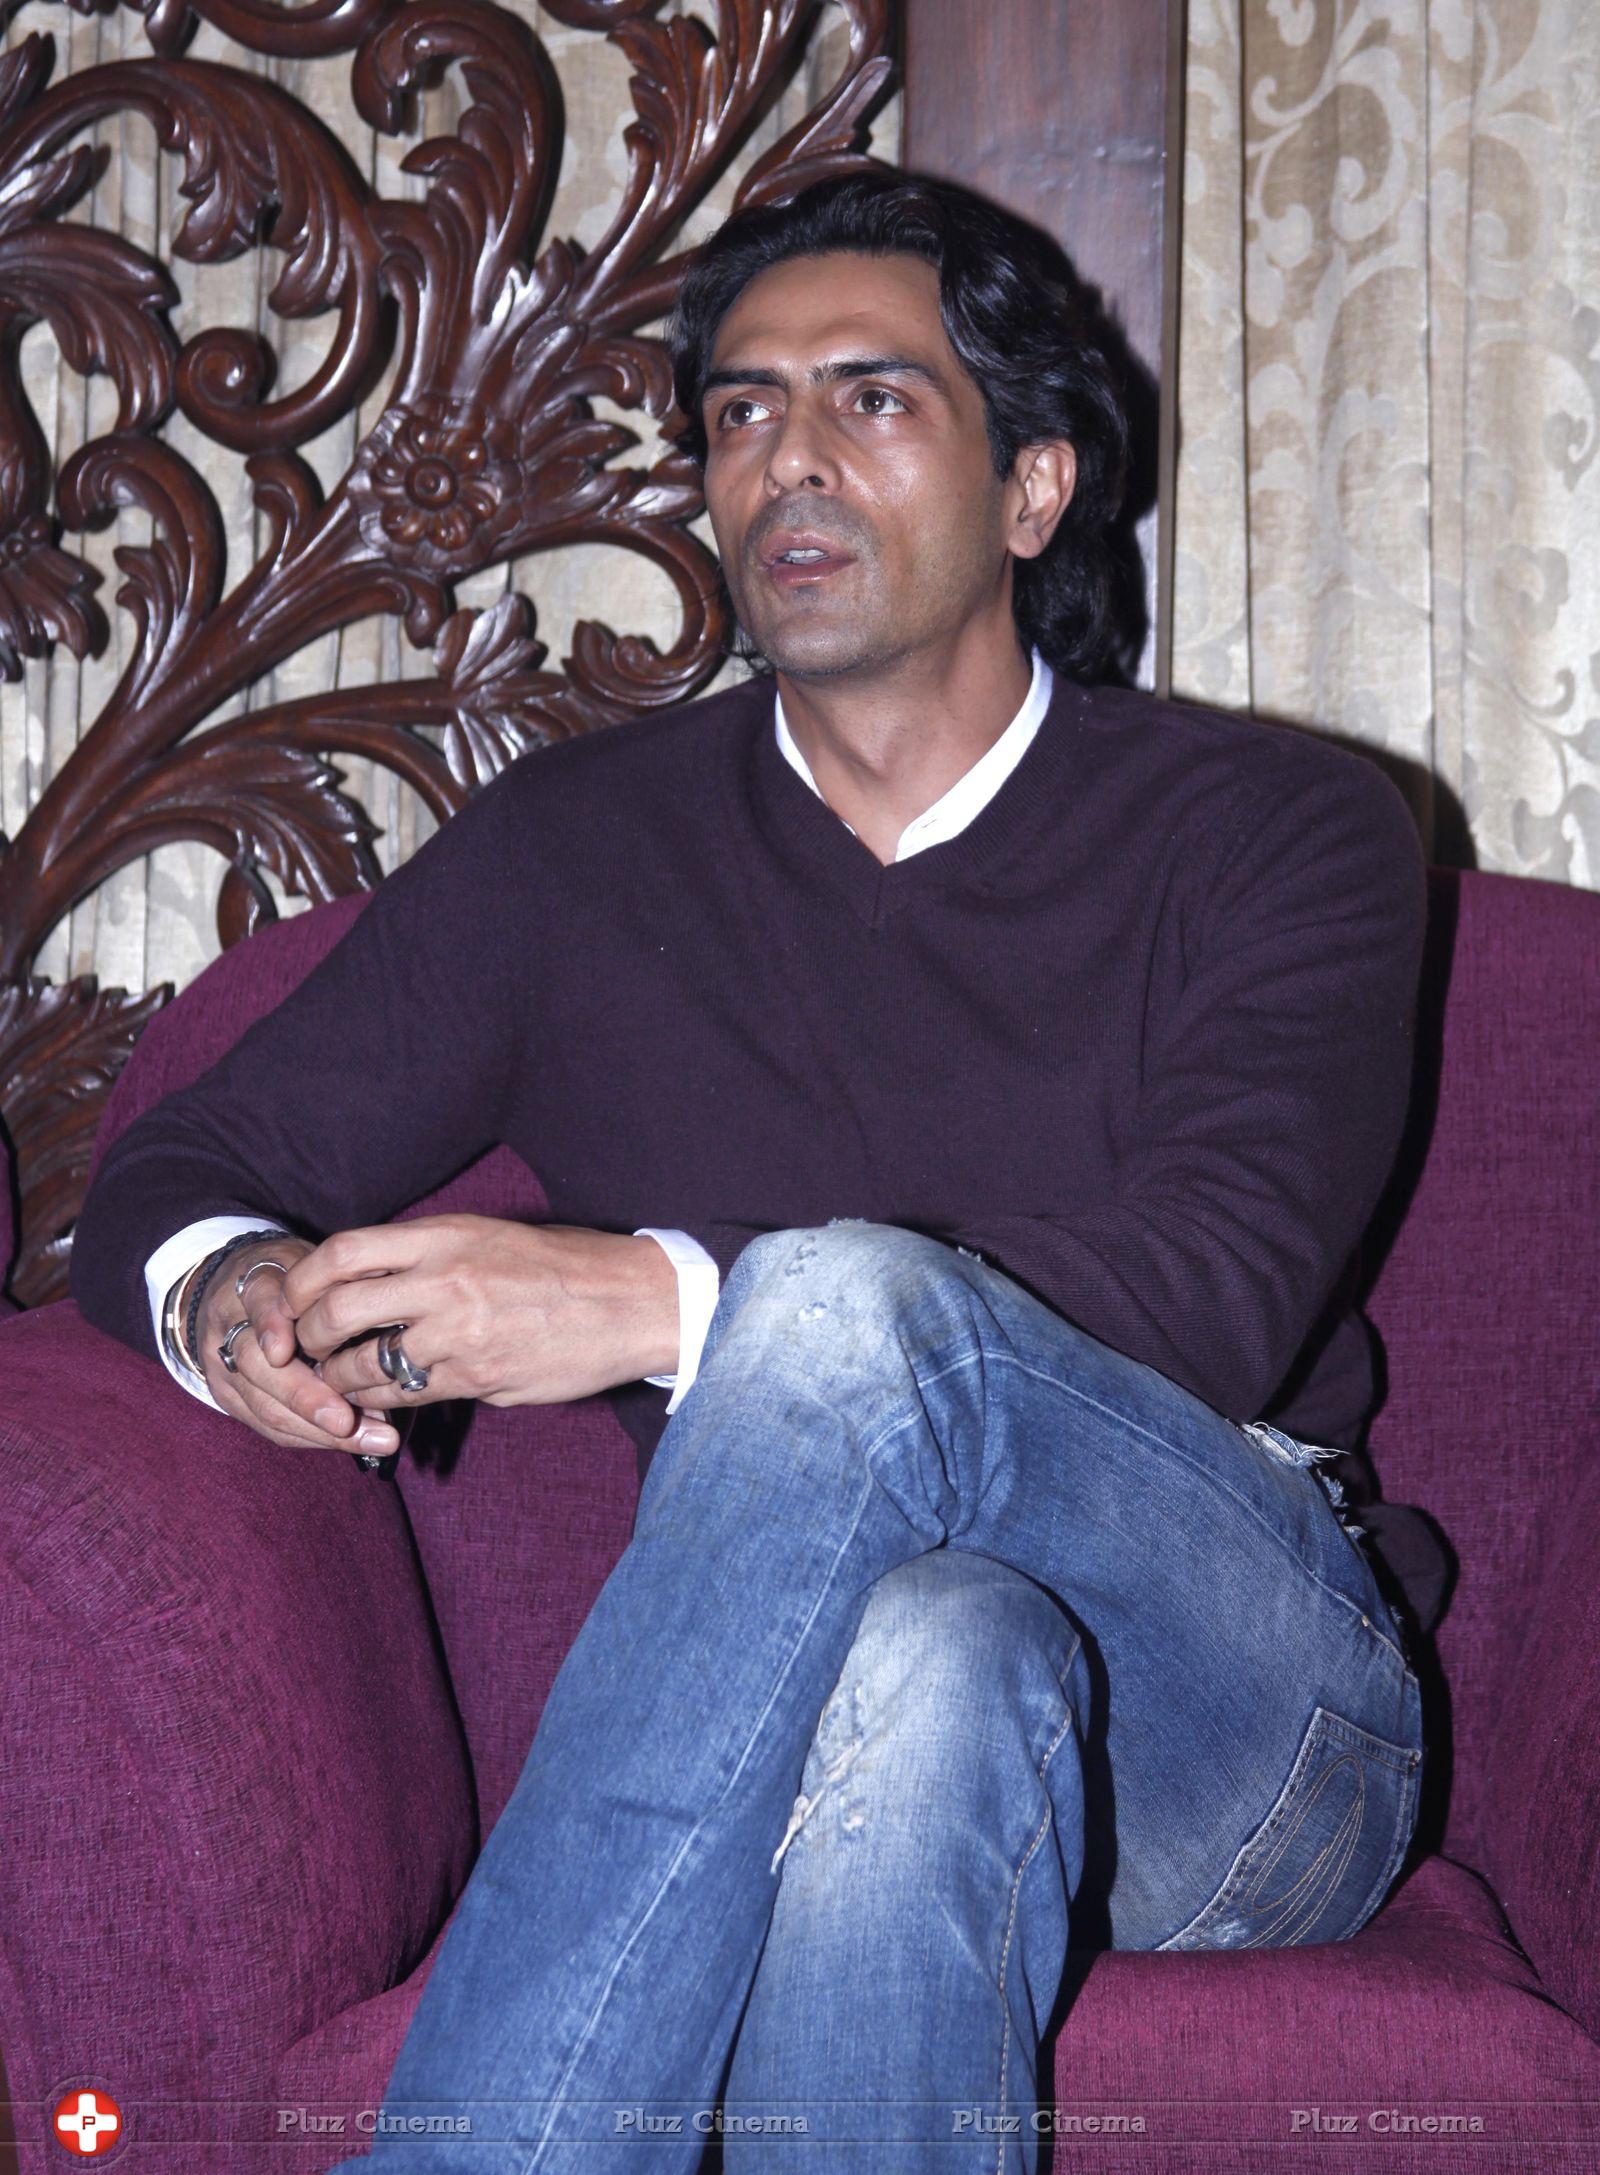 Arjun Rampal - Arjun Rampal meets Minister over elephant Sunder abuse case Photos | Picture 700204